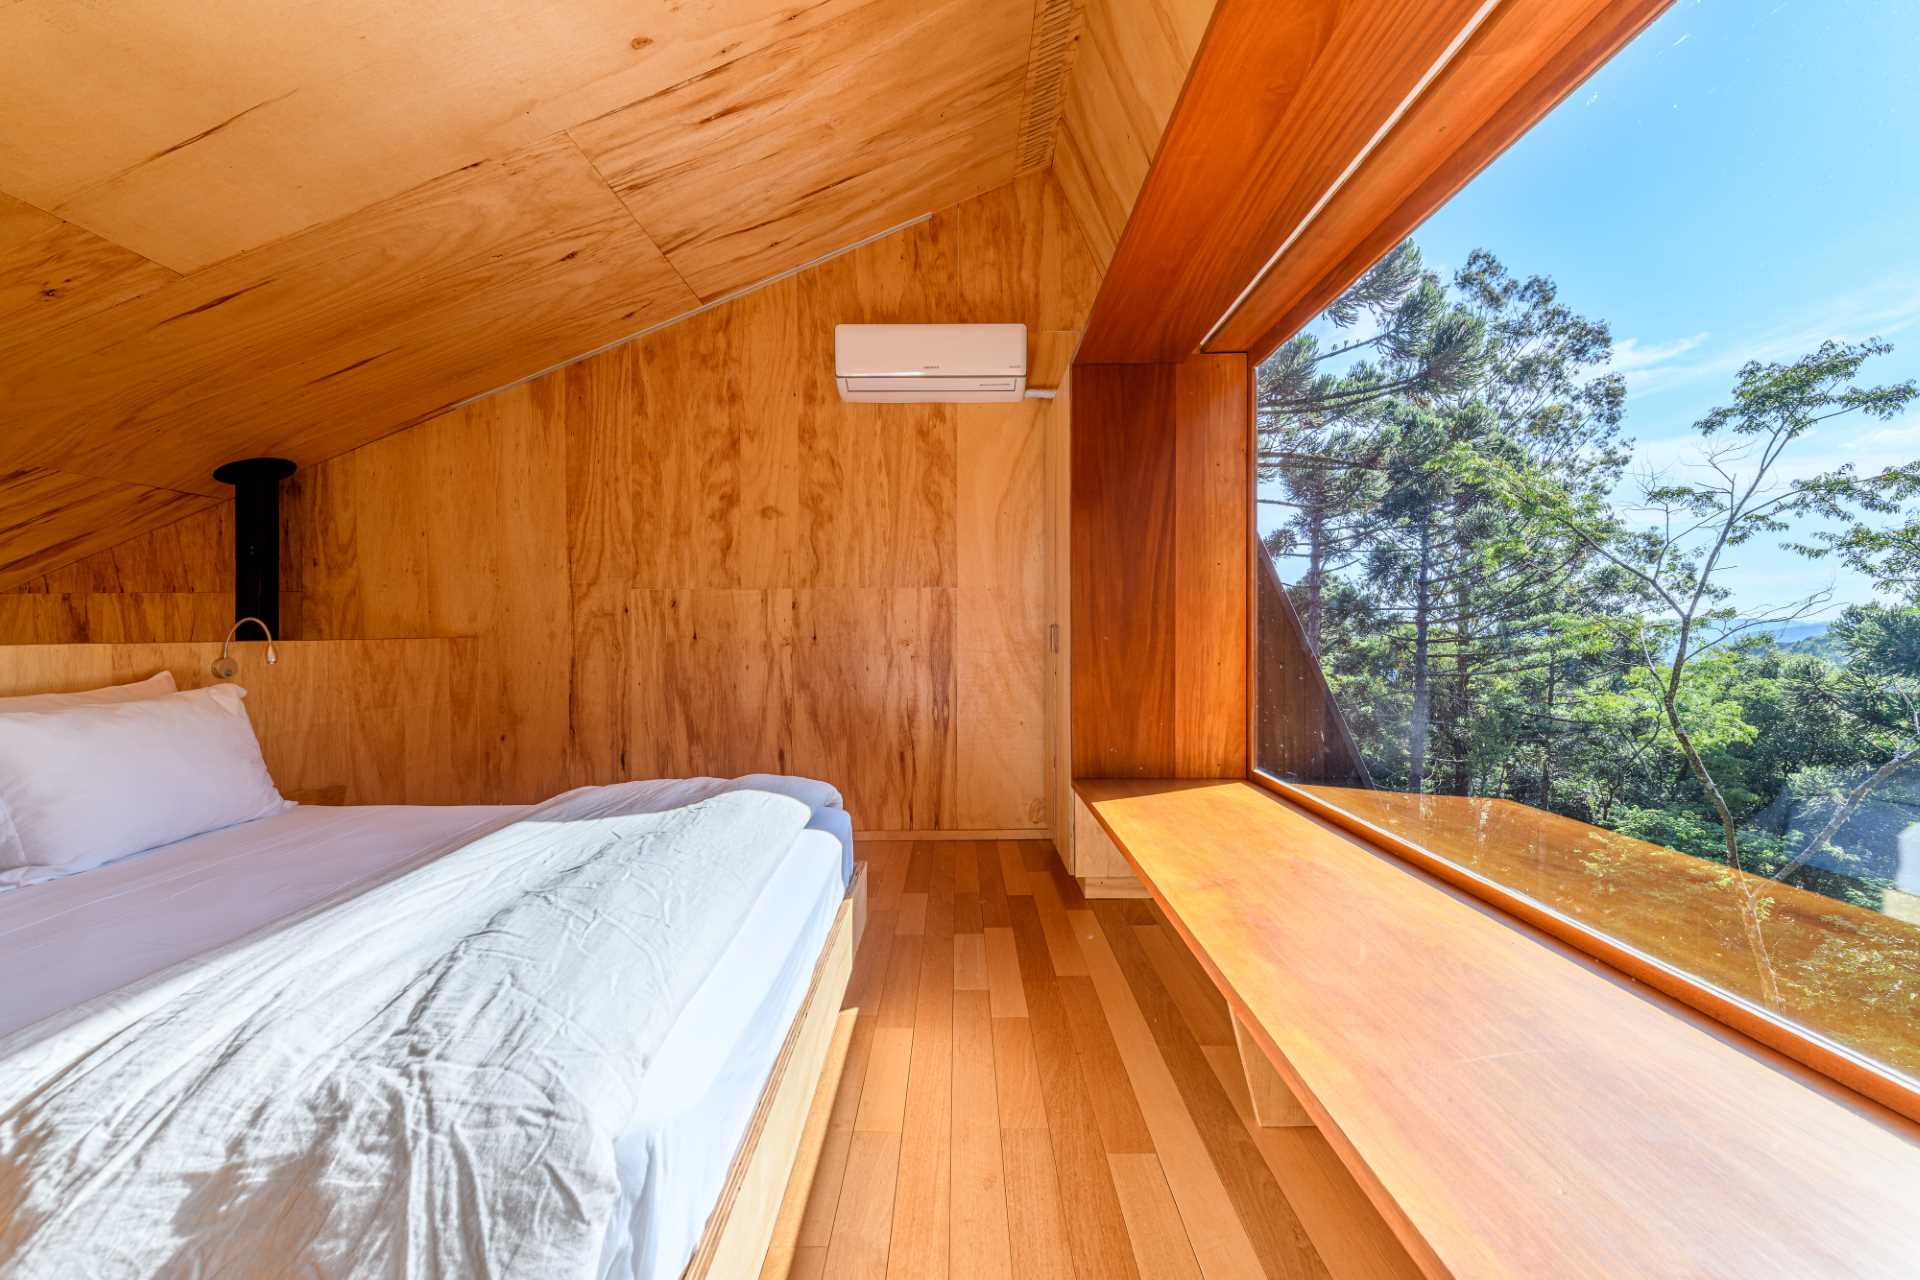 The bedroom of a modern tree house includes two closets, a large picture window, and a window bench.